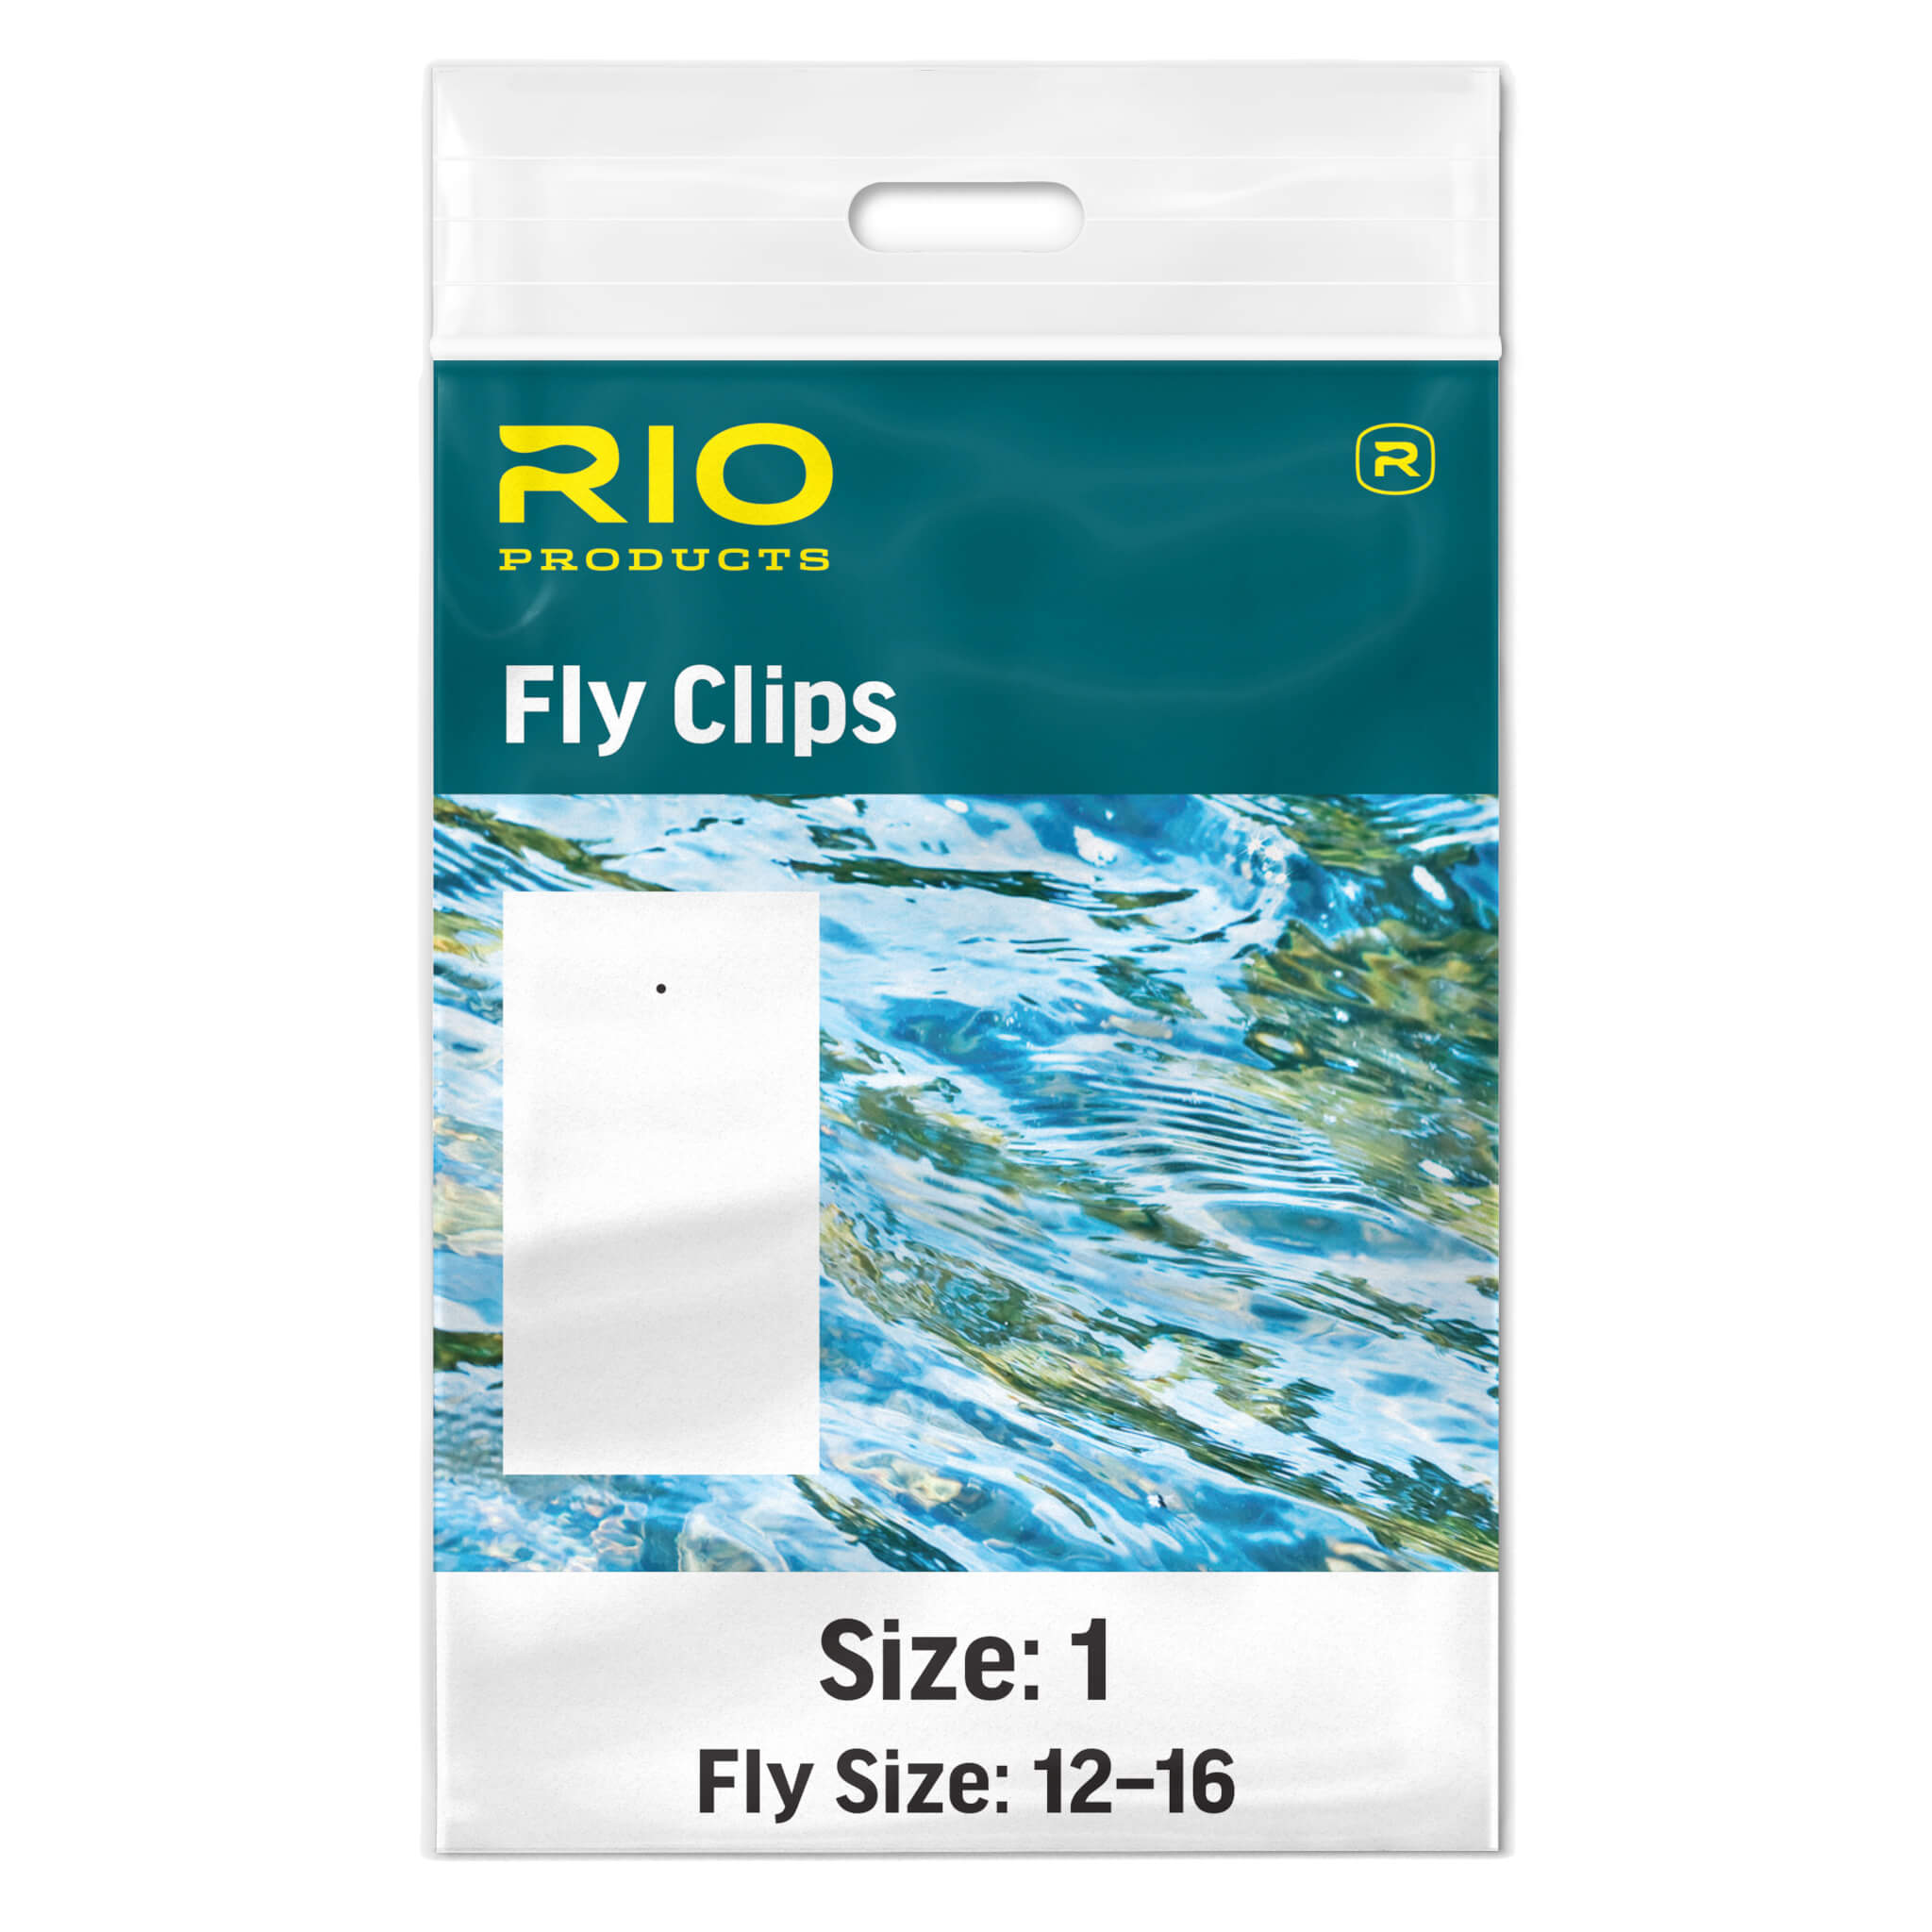 RIO Fly Clip – Guide Flyfishing, Fly Fishing Rods, Reels